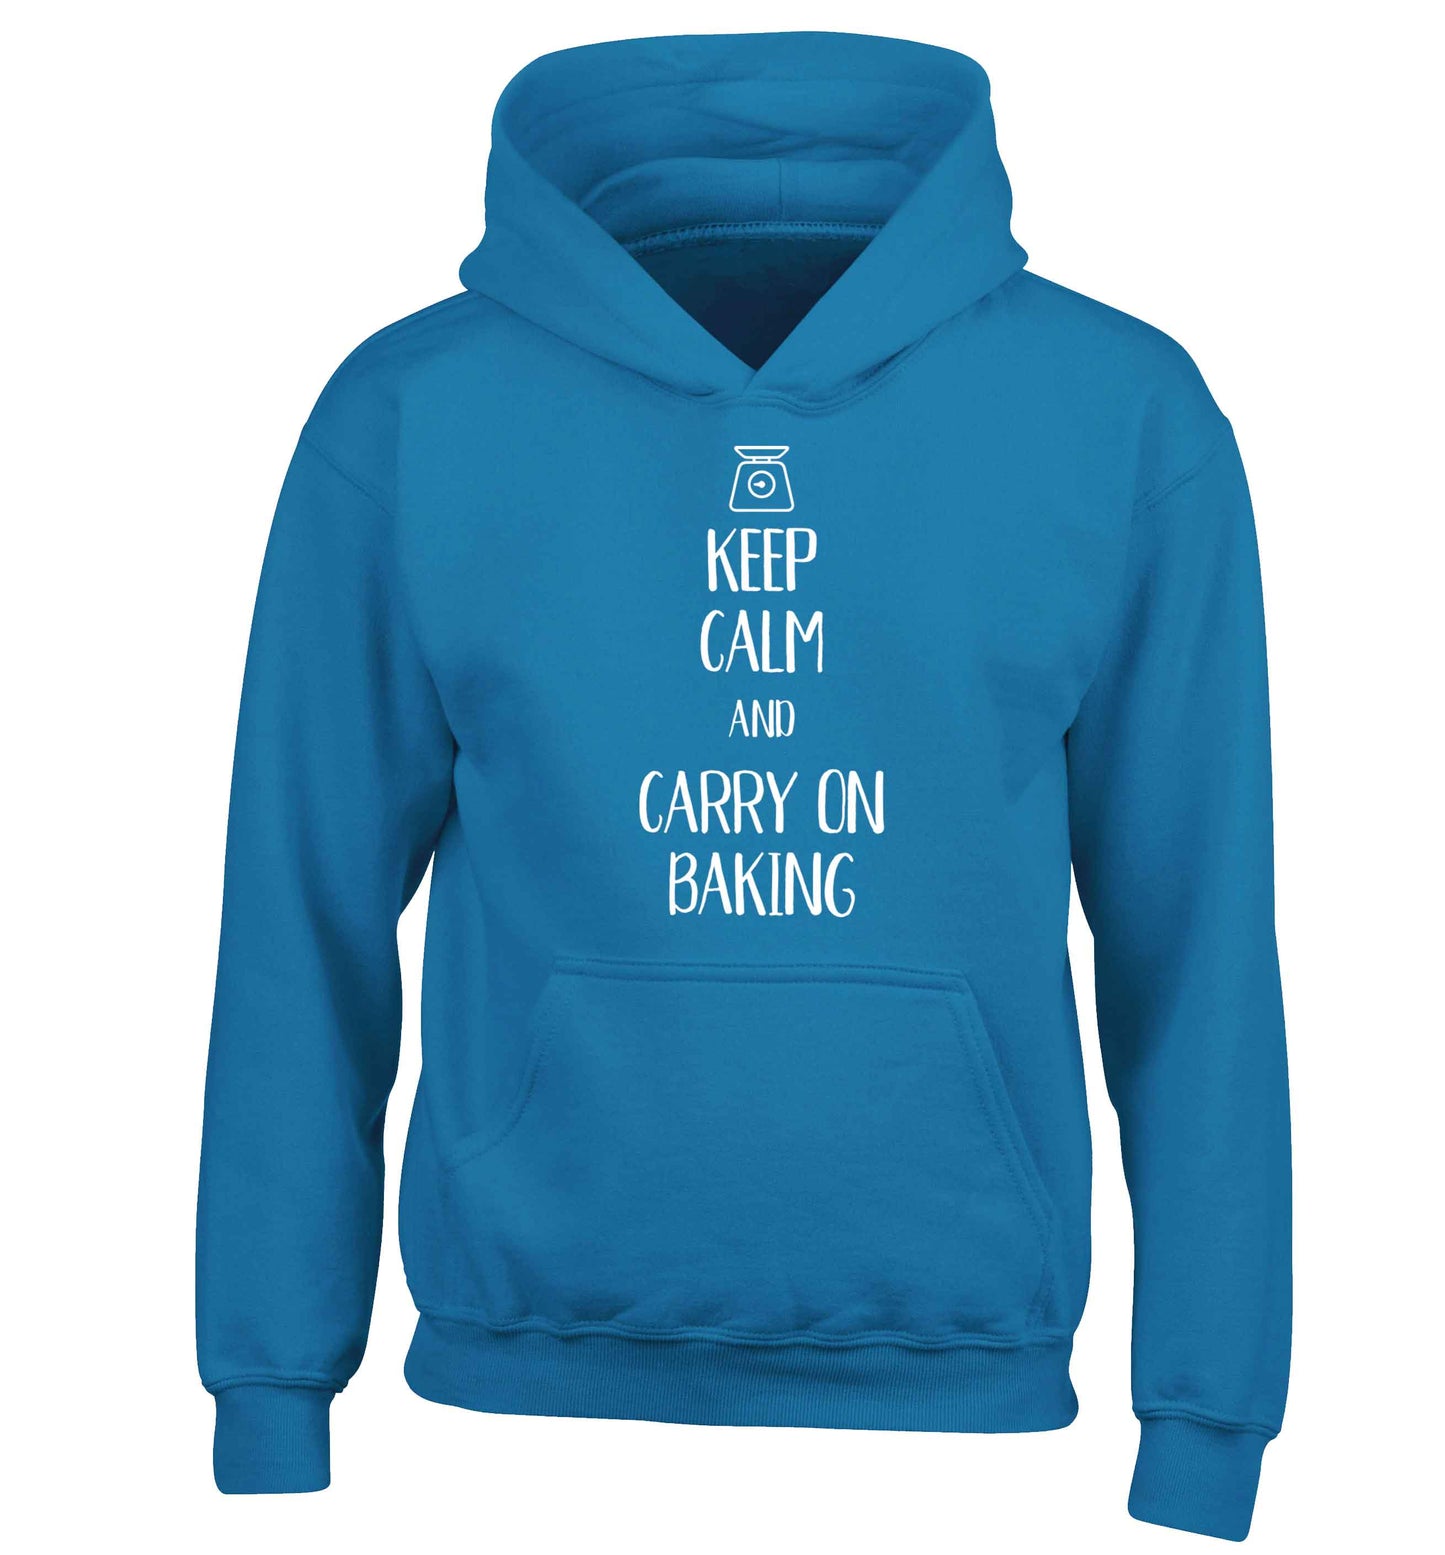 Keep calm and carry on baking children's blue hoodie 12-13 Years